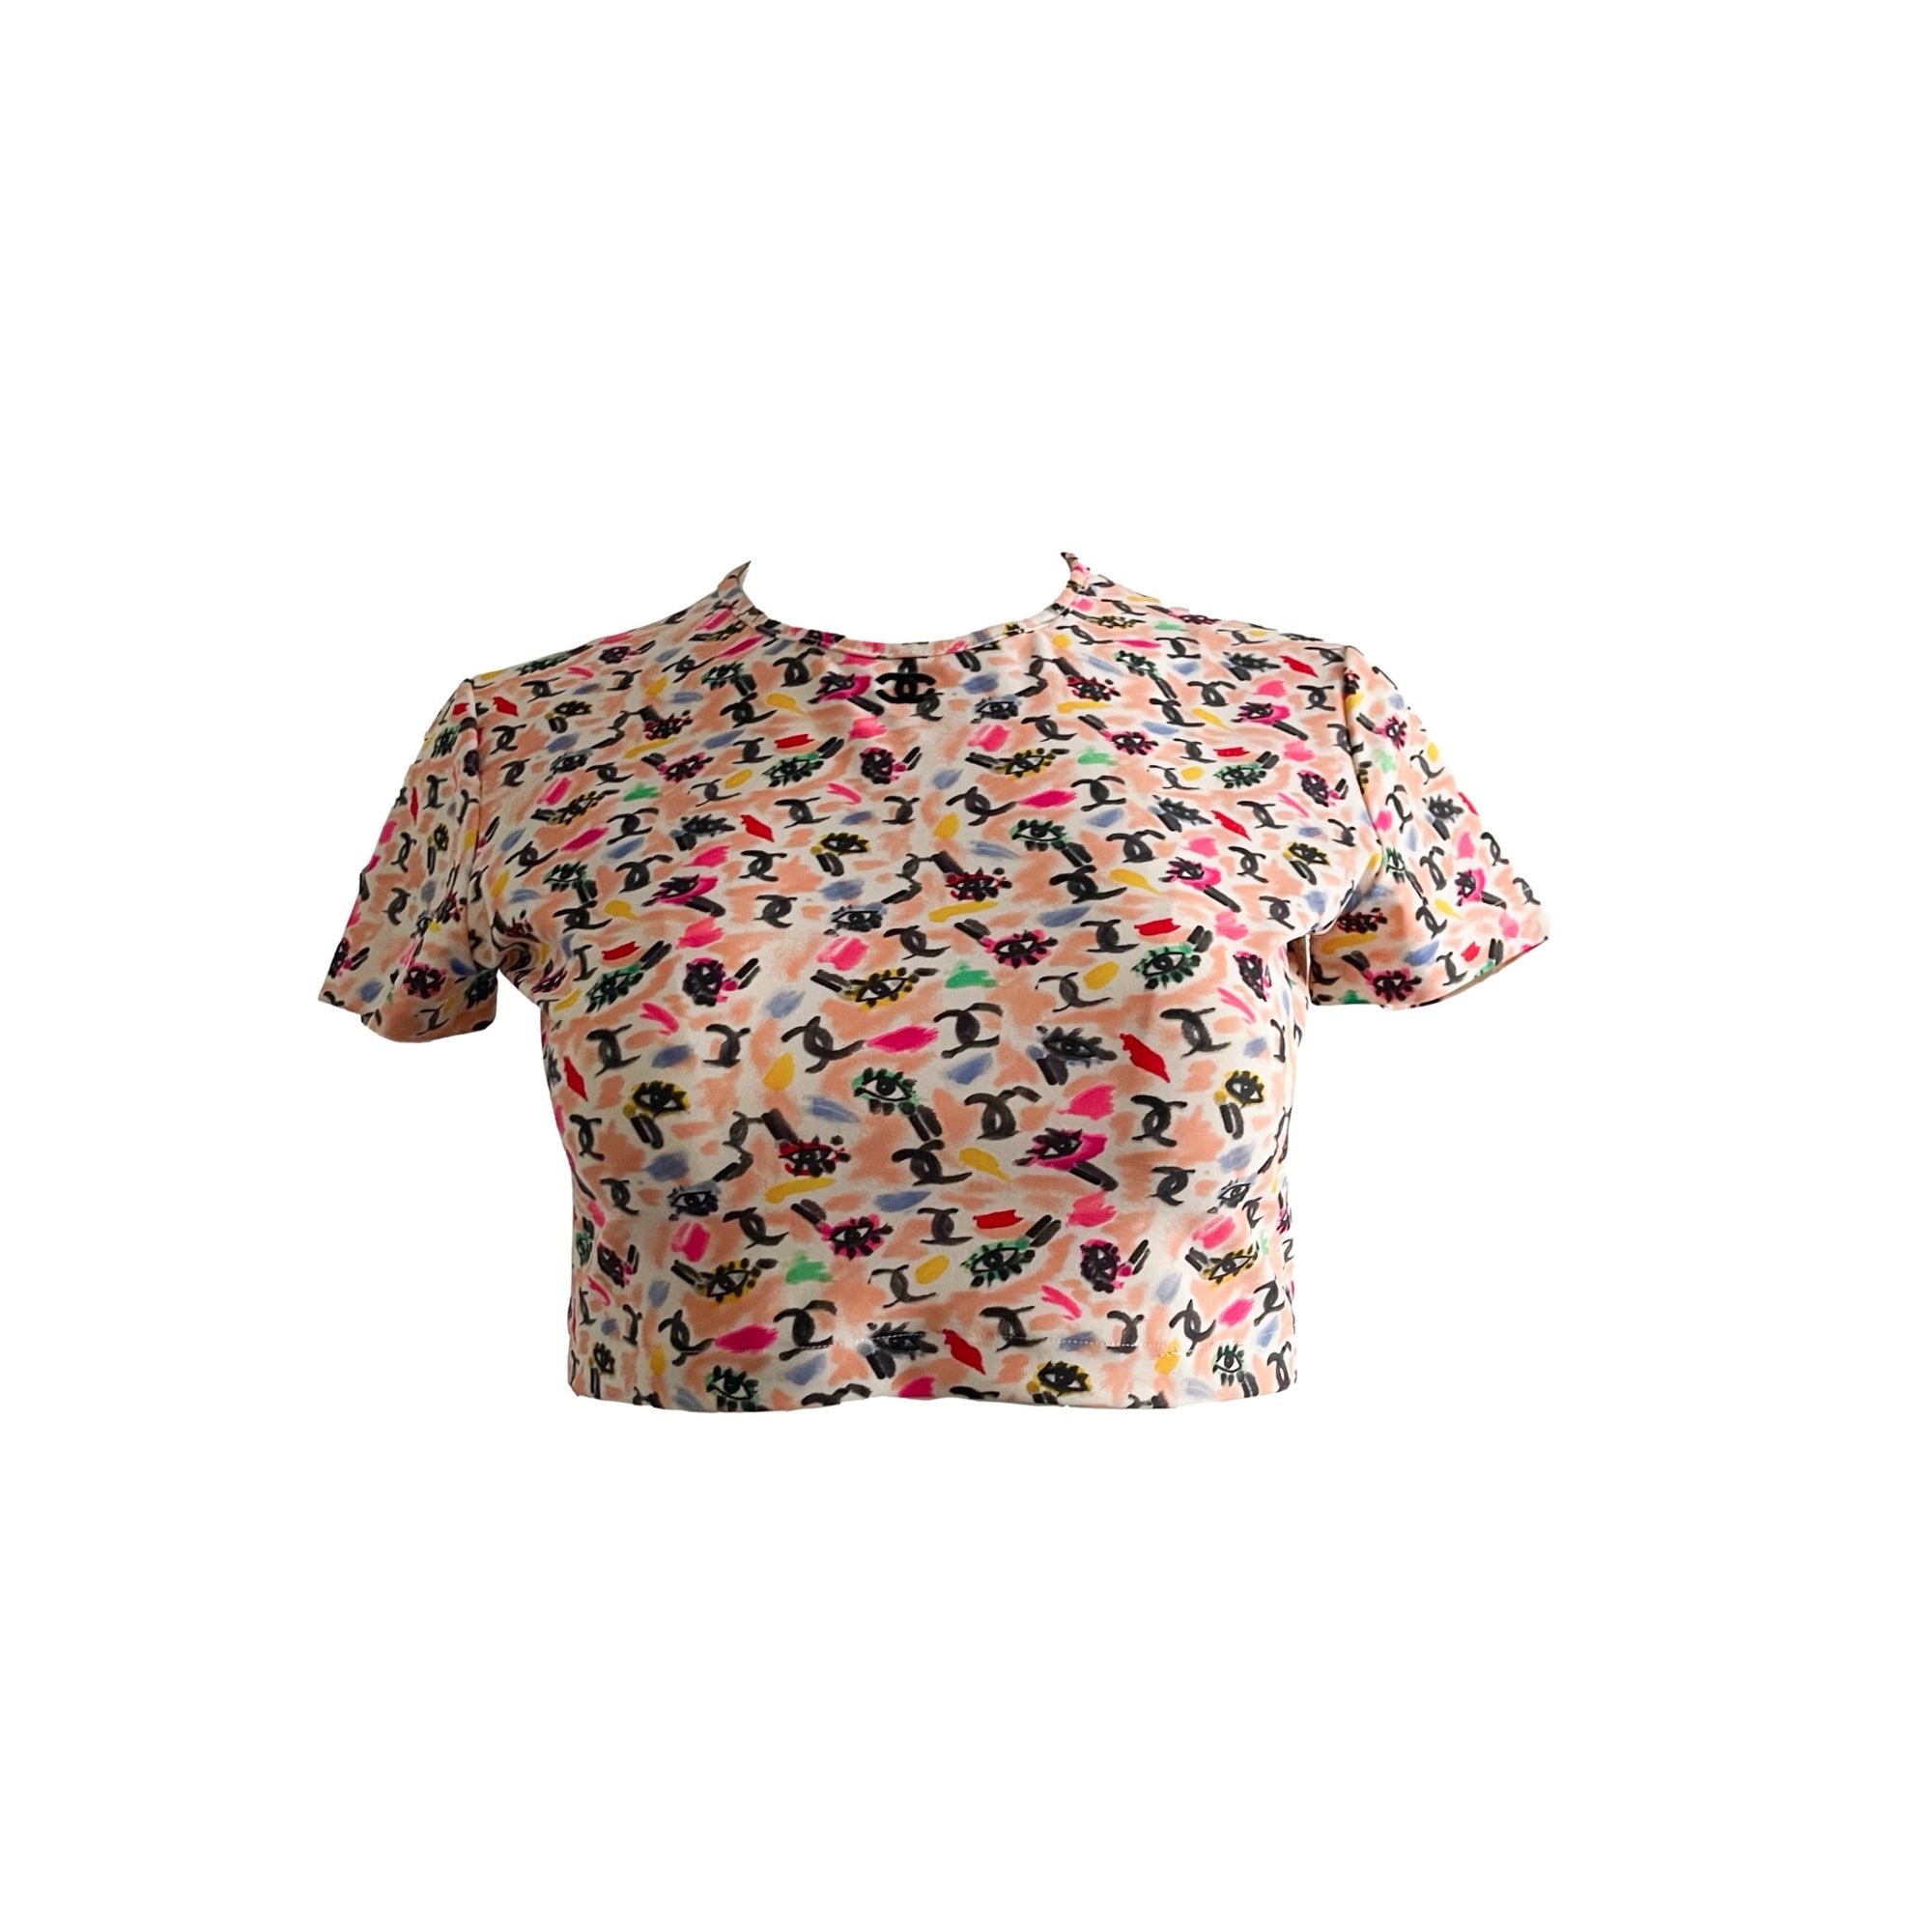 Chanel Pink All Over Eye Logo Crop Top - Apparel